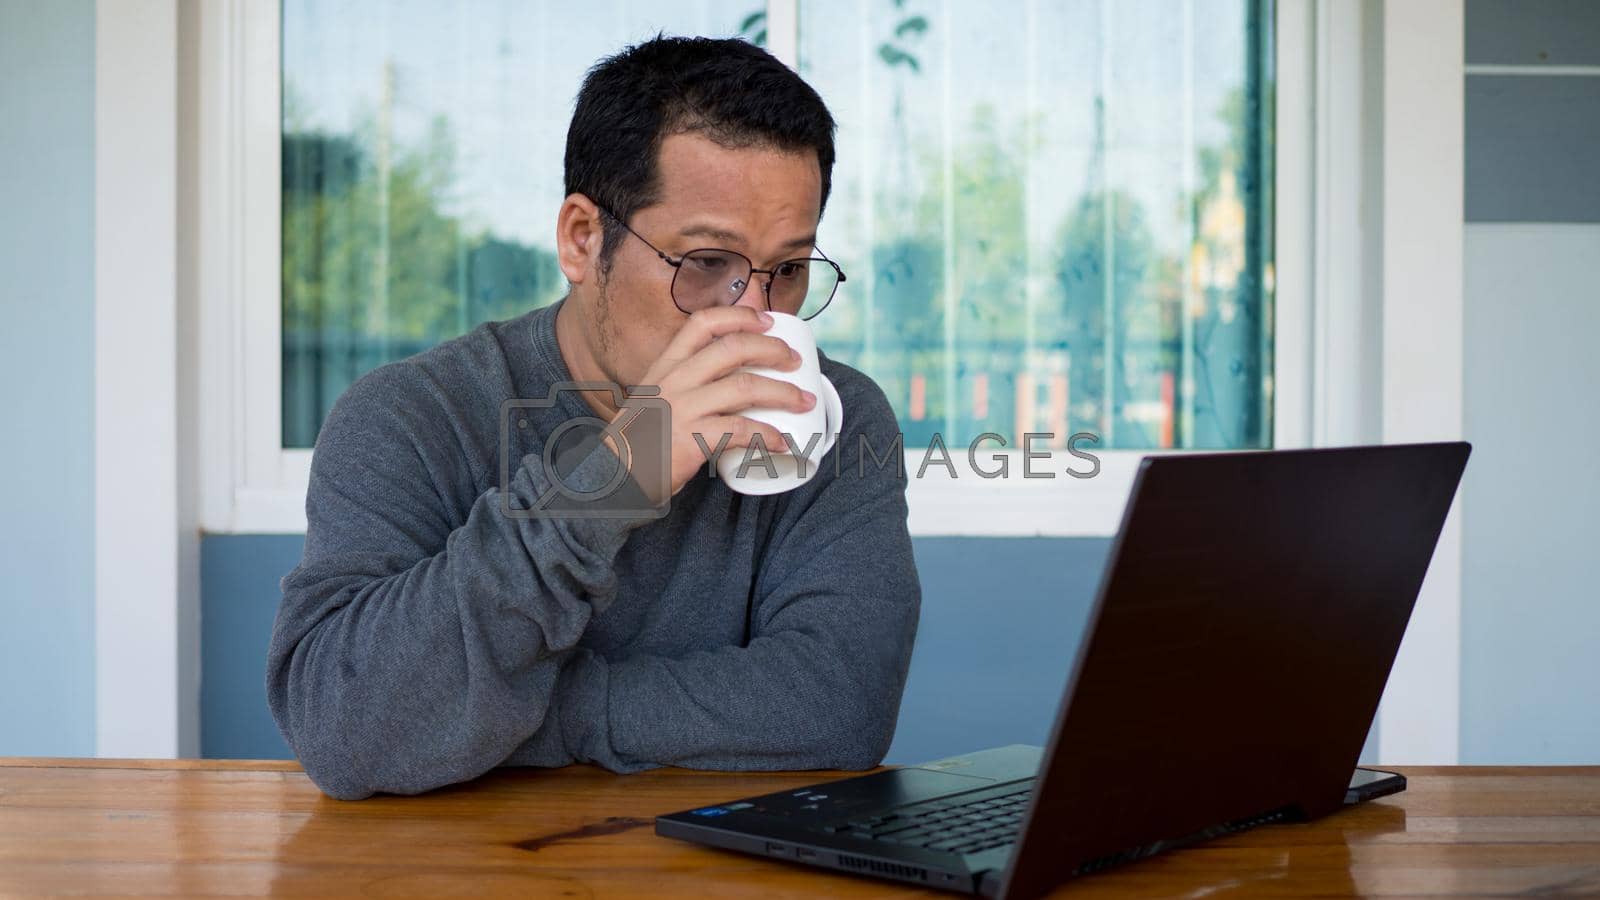 Royalty free image of Asian men wear long sleeves and eyeglasses.He is drink a coffee and Sitting at home working on a computer on a wooden table. Work from home concept. by Unimages2527